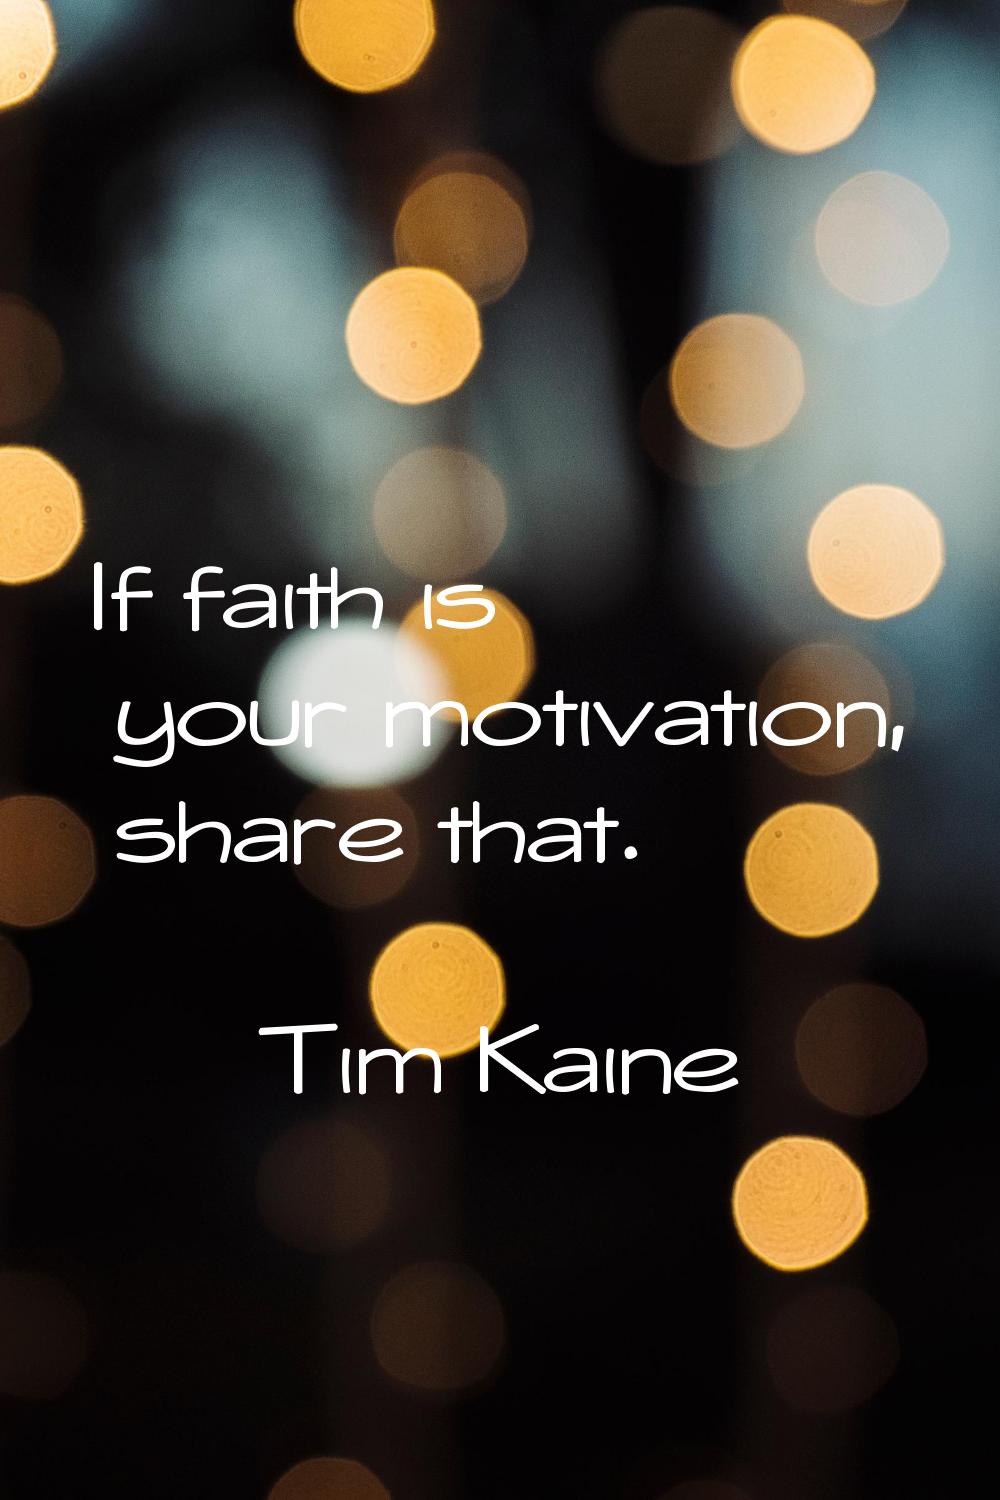 If faith is your motivation, share that.